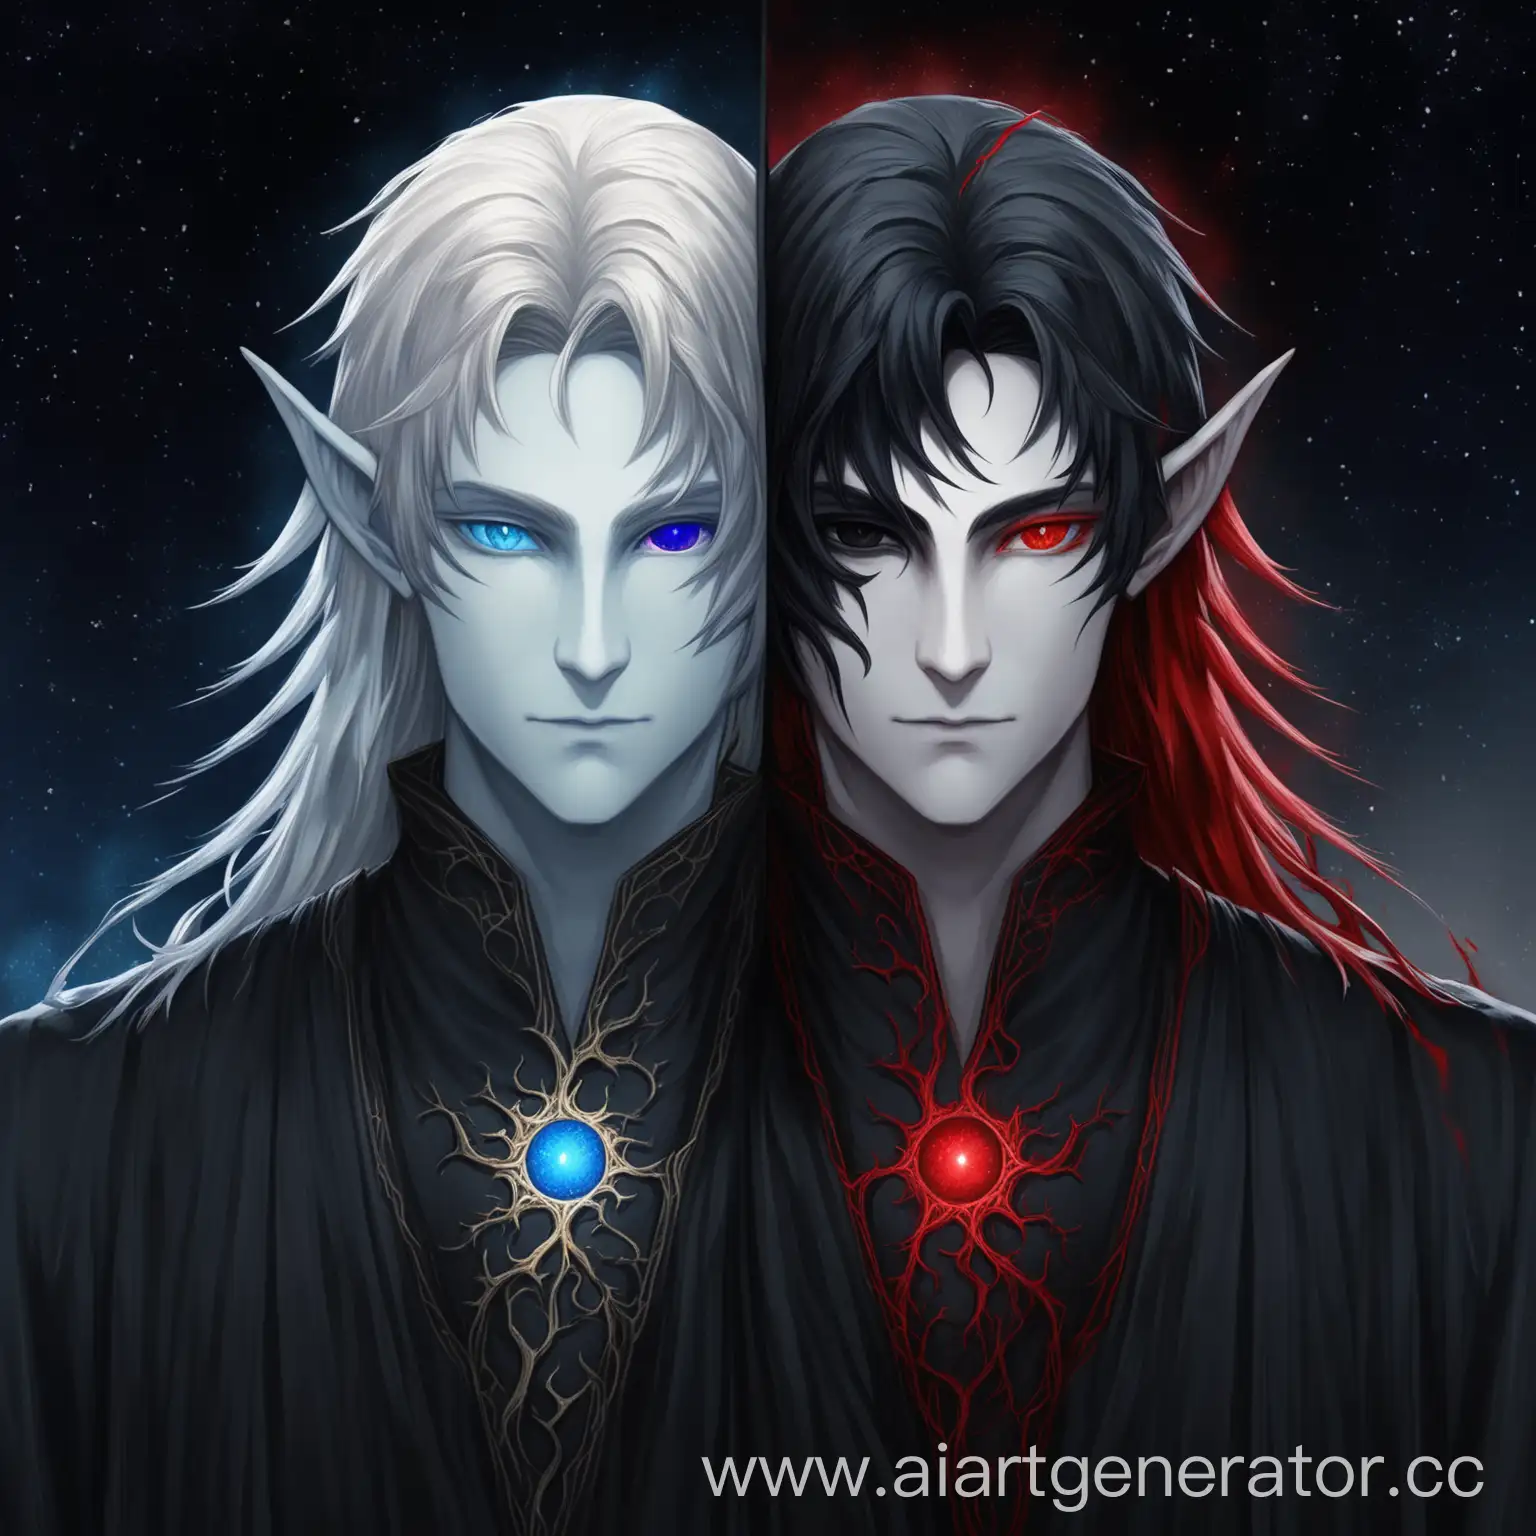 An adult astral elf with short hair, he has a split on his head, one side is white, the other is black, he has heterochromia, one eye is blue, the other is red, and black veins are visible from under the red around the eyes on his face, and they are both visible with their hair down, dressed in a black robe.

